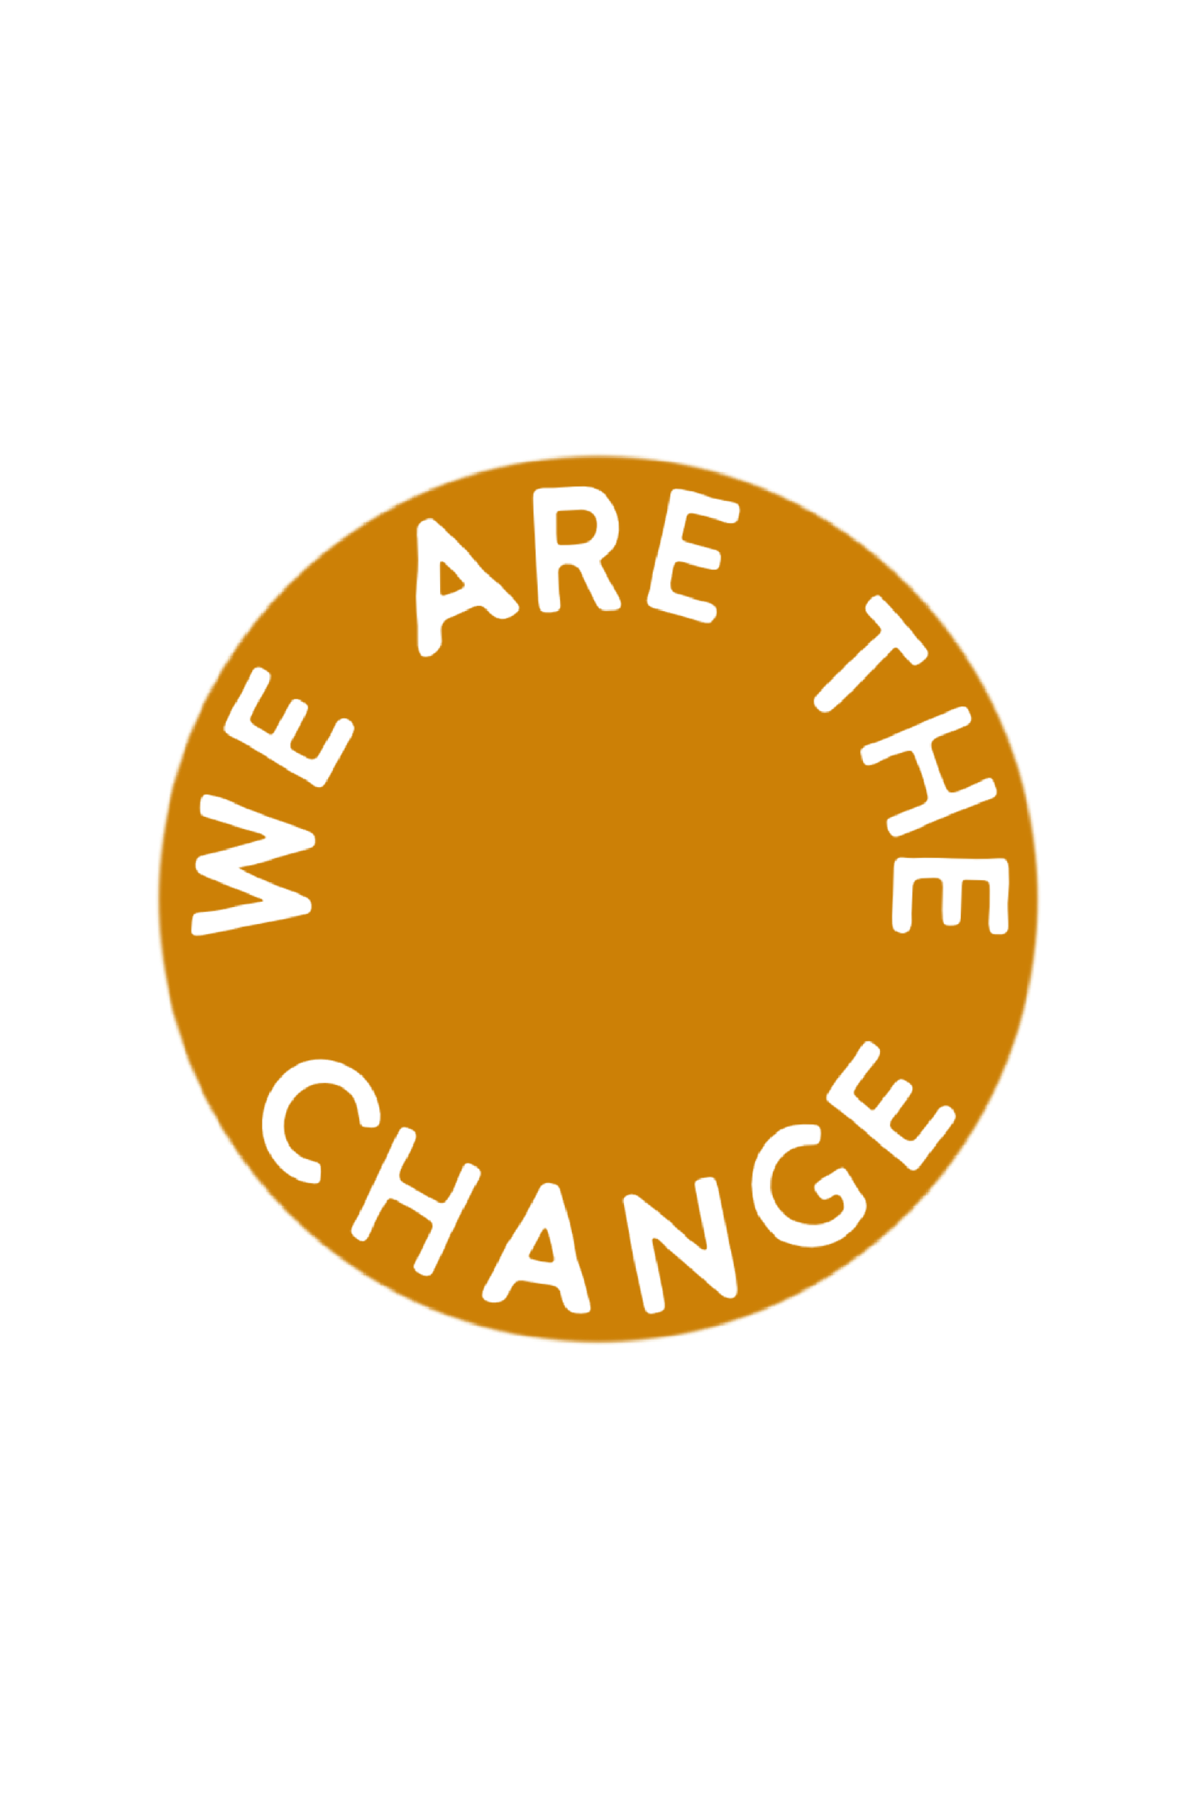 We are the Change Sticker